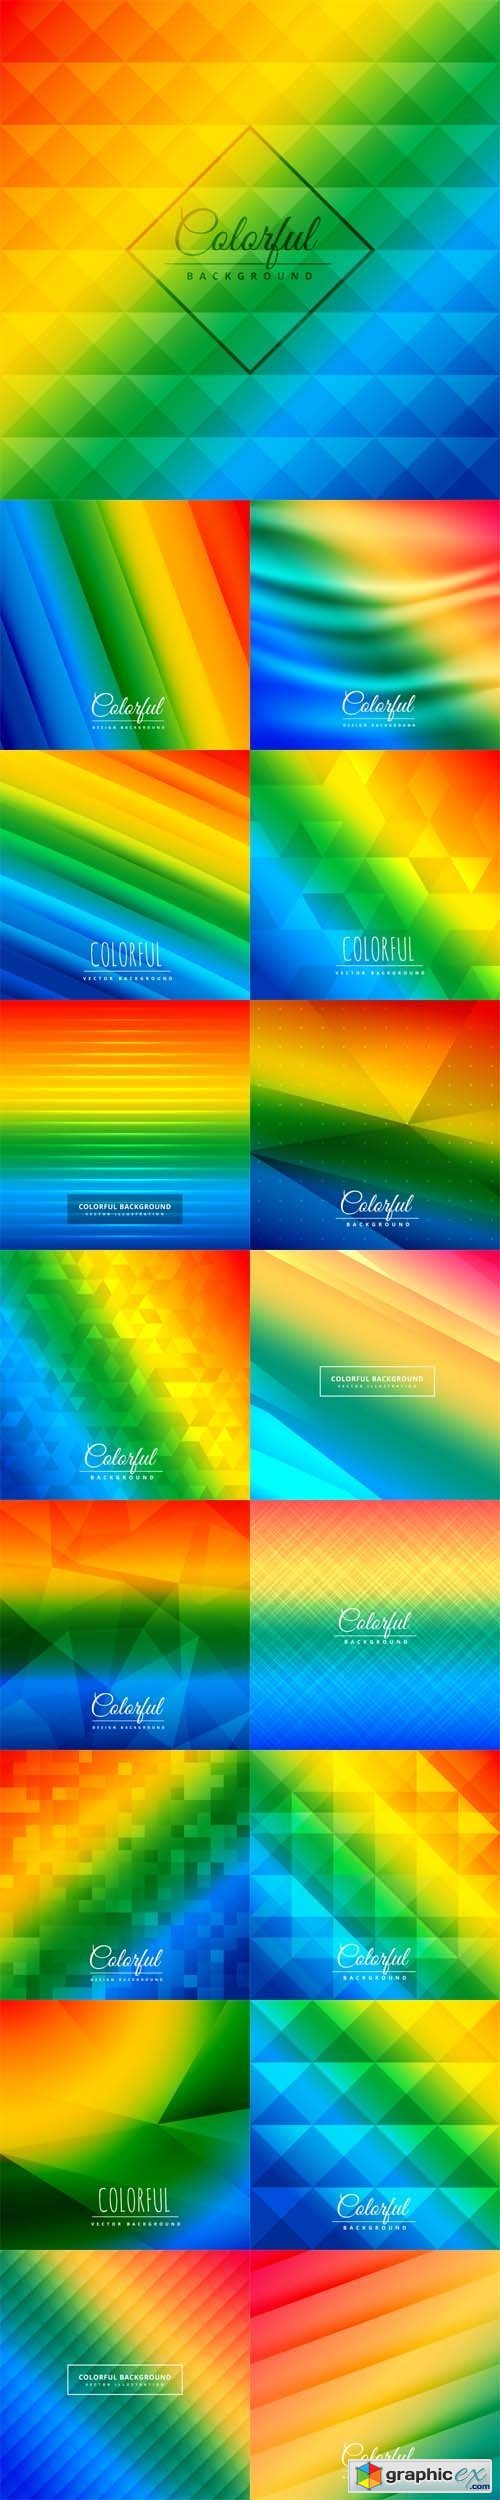 Abstract Colorful Backgrounds with Triangle Patterns